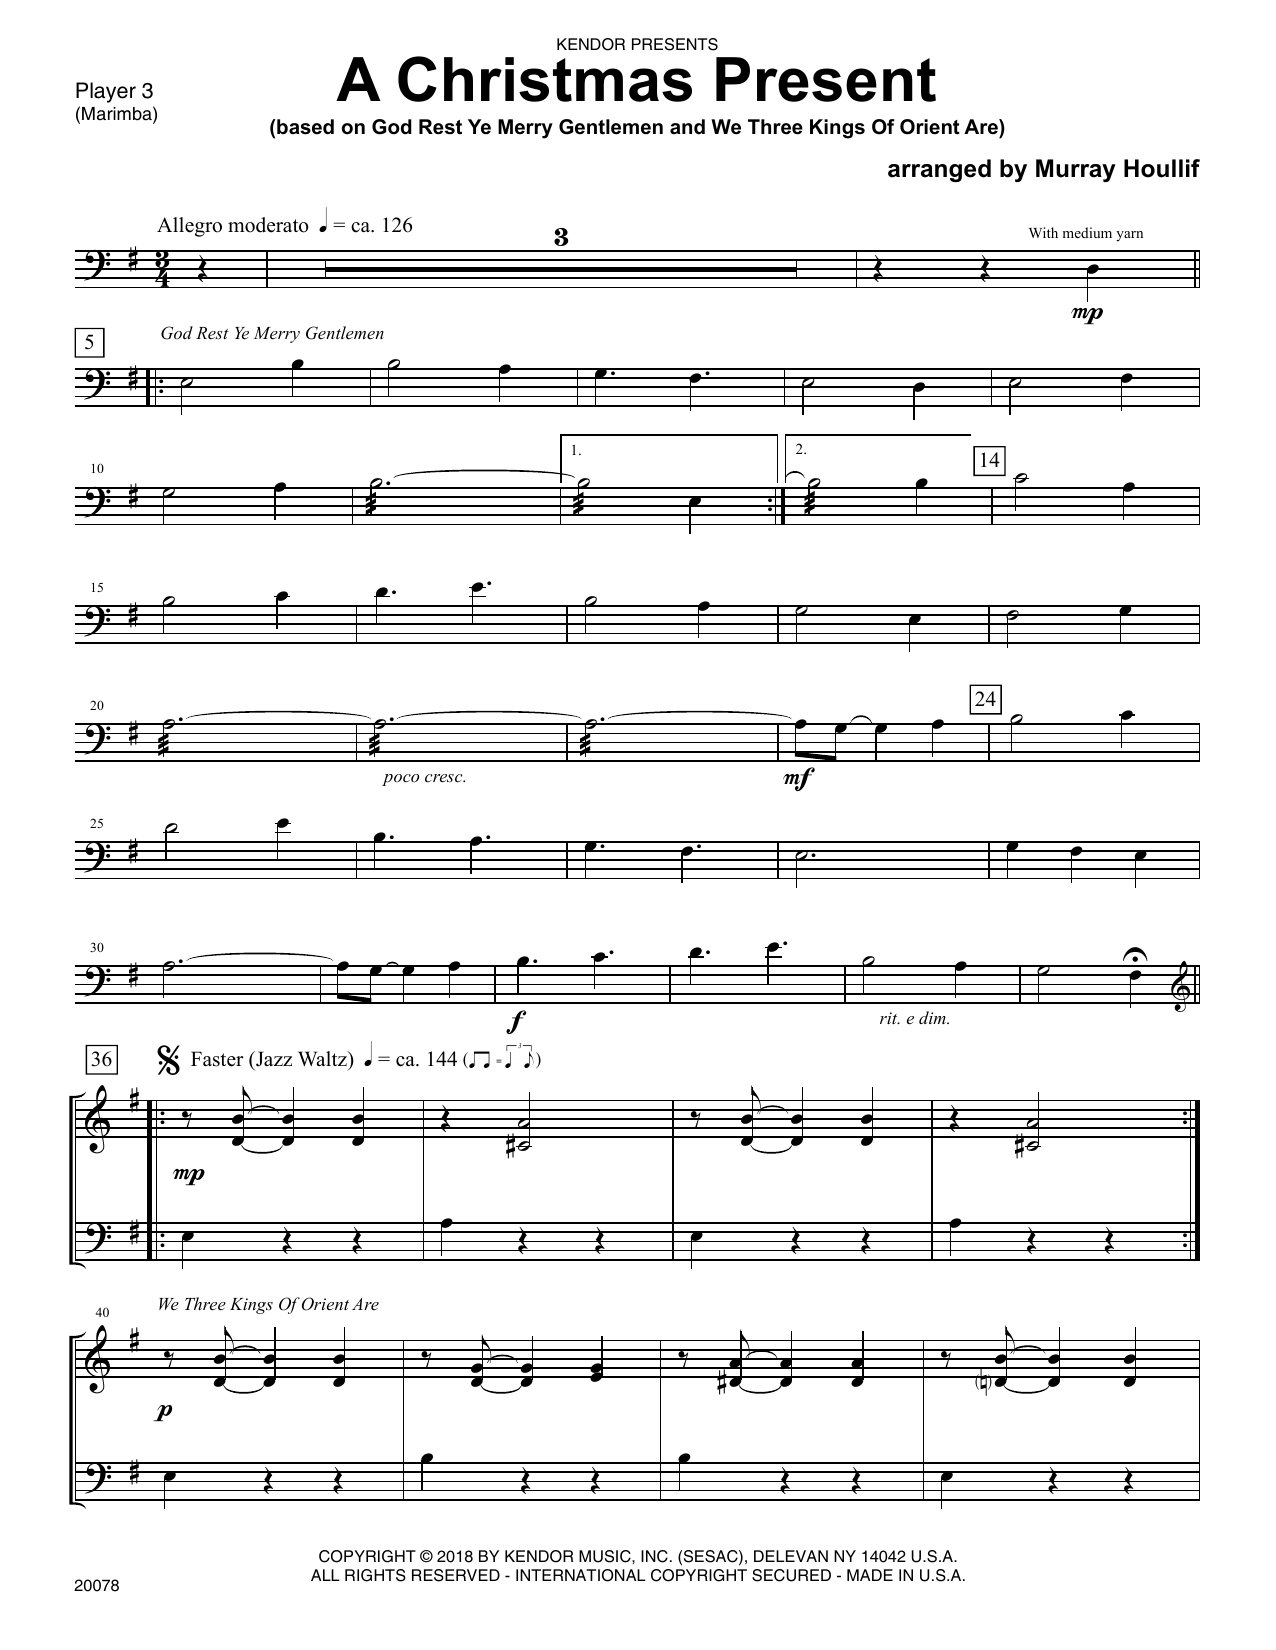 Download Murray Houllif A Christmas Present - Percussion 3 Sheet Music